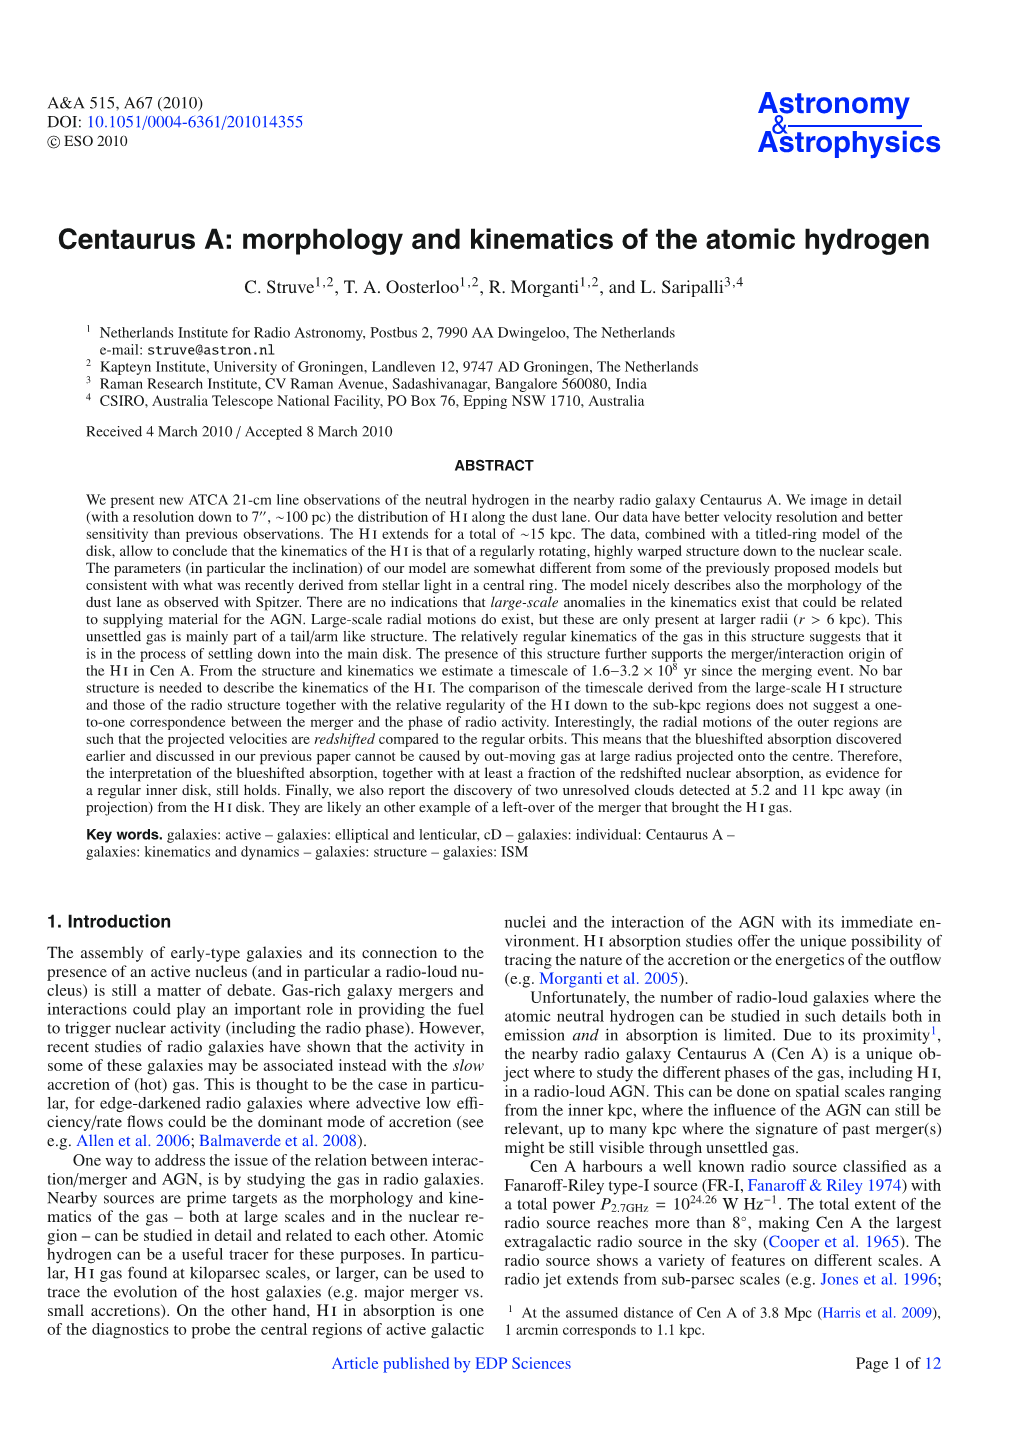 Centaurus A: Morphology and Kinematics of the Atomic Hydrogen